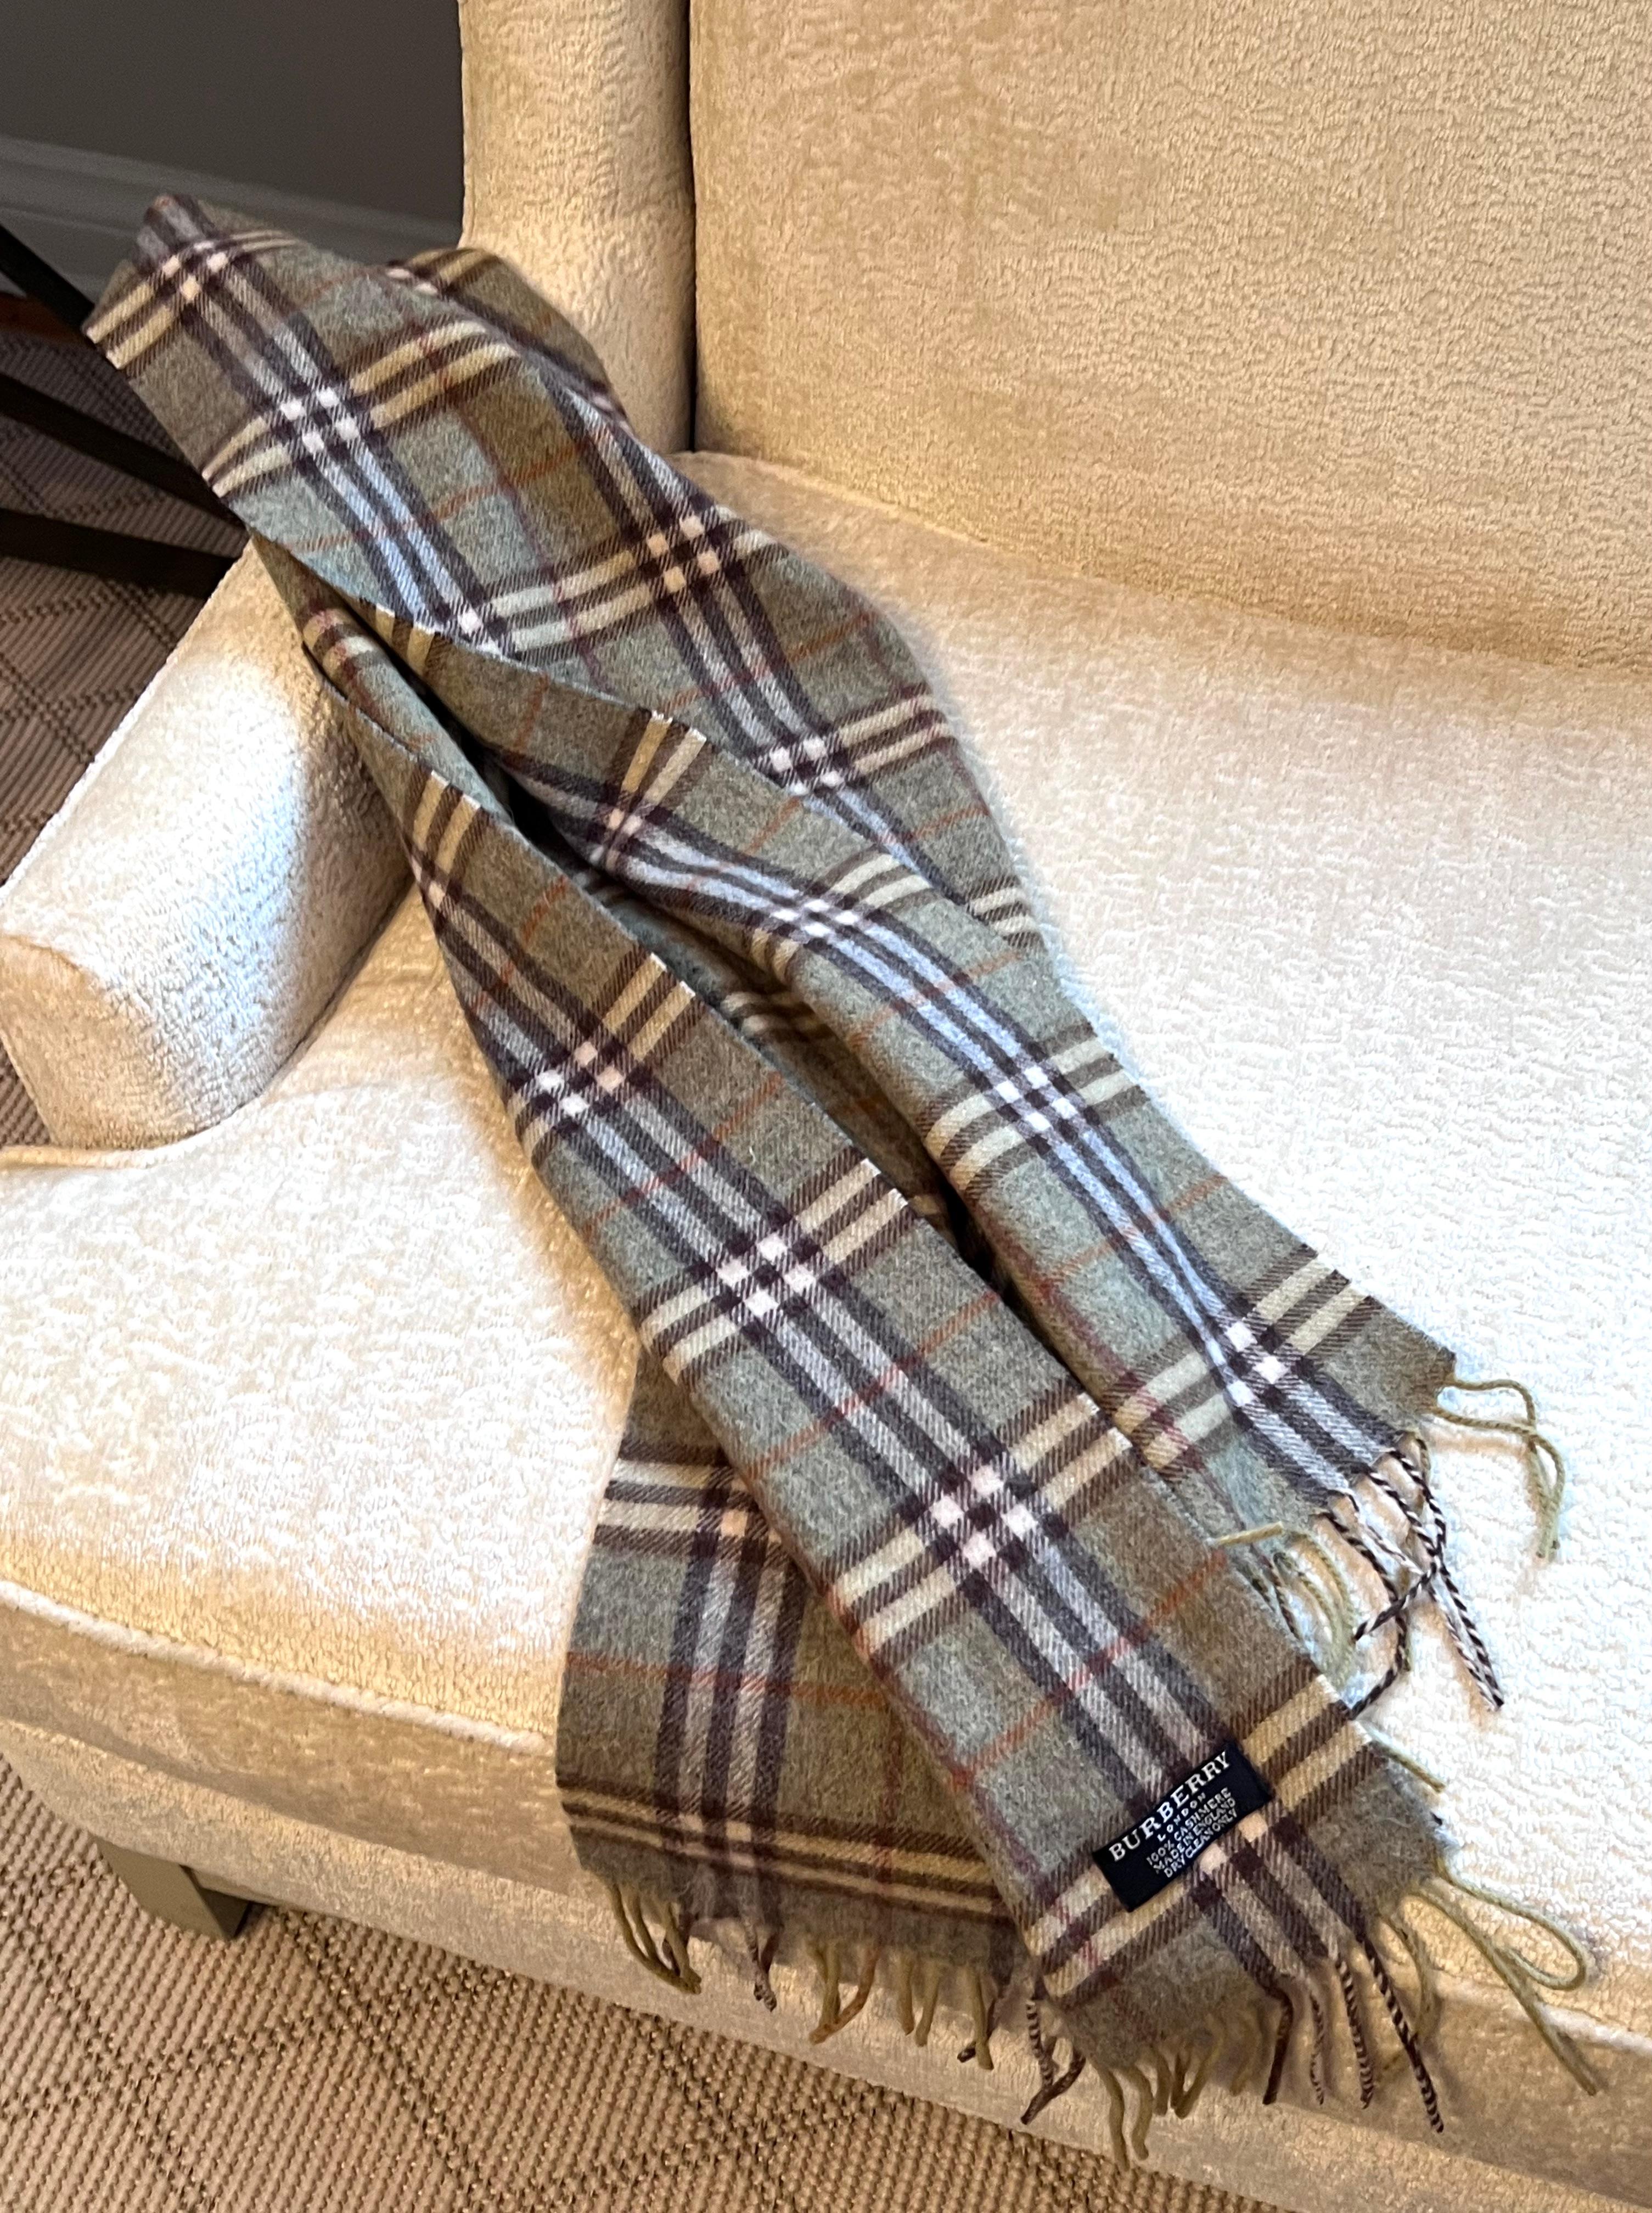 Plaid Burberry London Tartan Check Light Gray Brown Cashmere Muffler Scarf In Good Condition For Sale In Los Angeles, CA